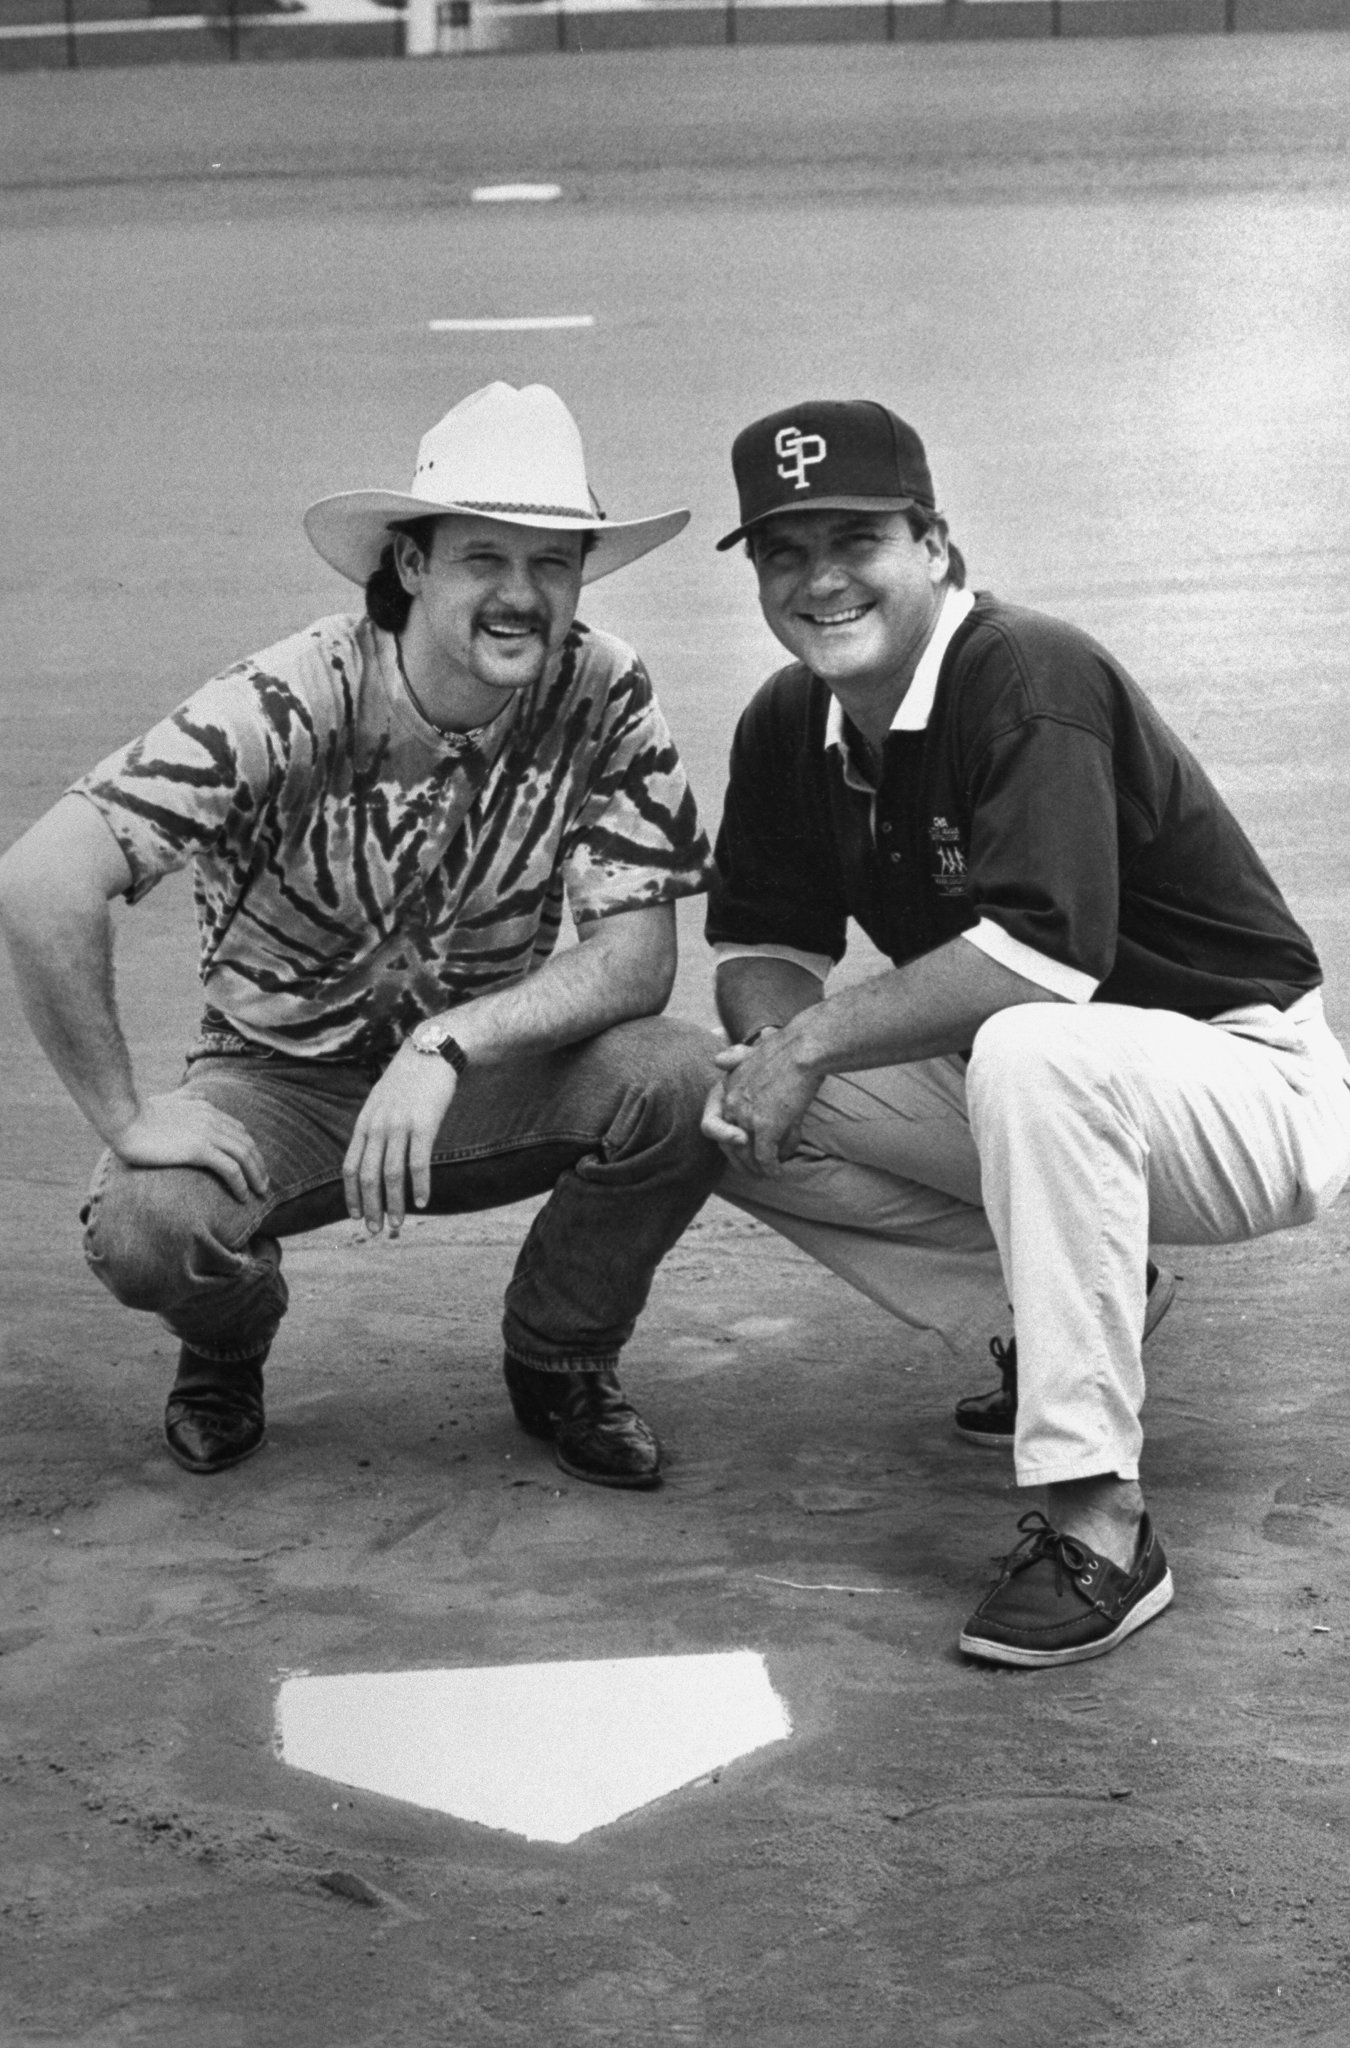 Tim McGraw w. father, former baseball player Tug McGraw in baseball cap, as they crouch next to home plate on baseball field. | Source: Getty Images